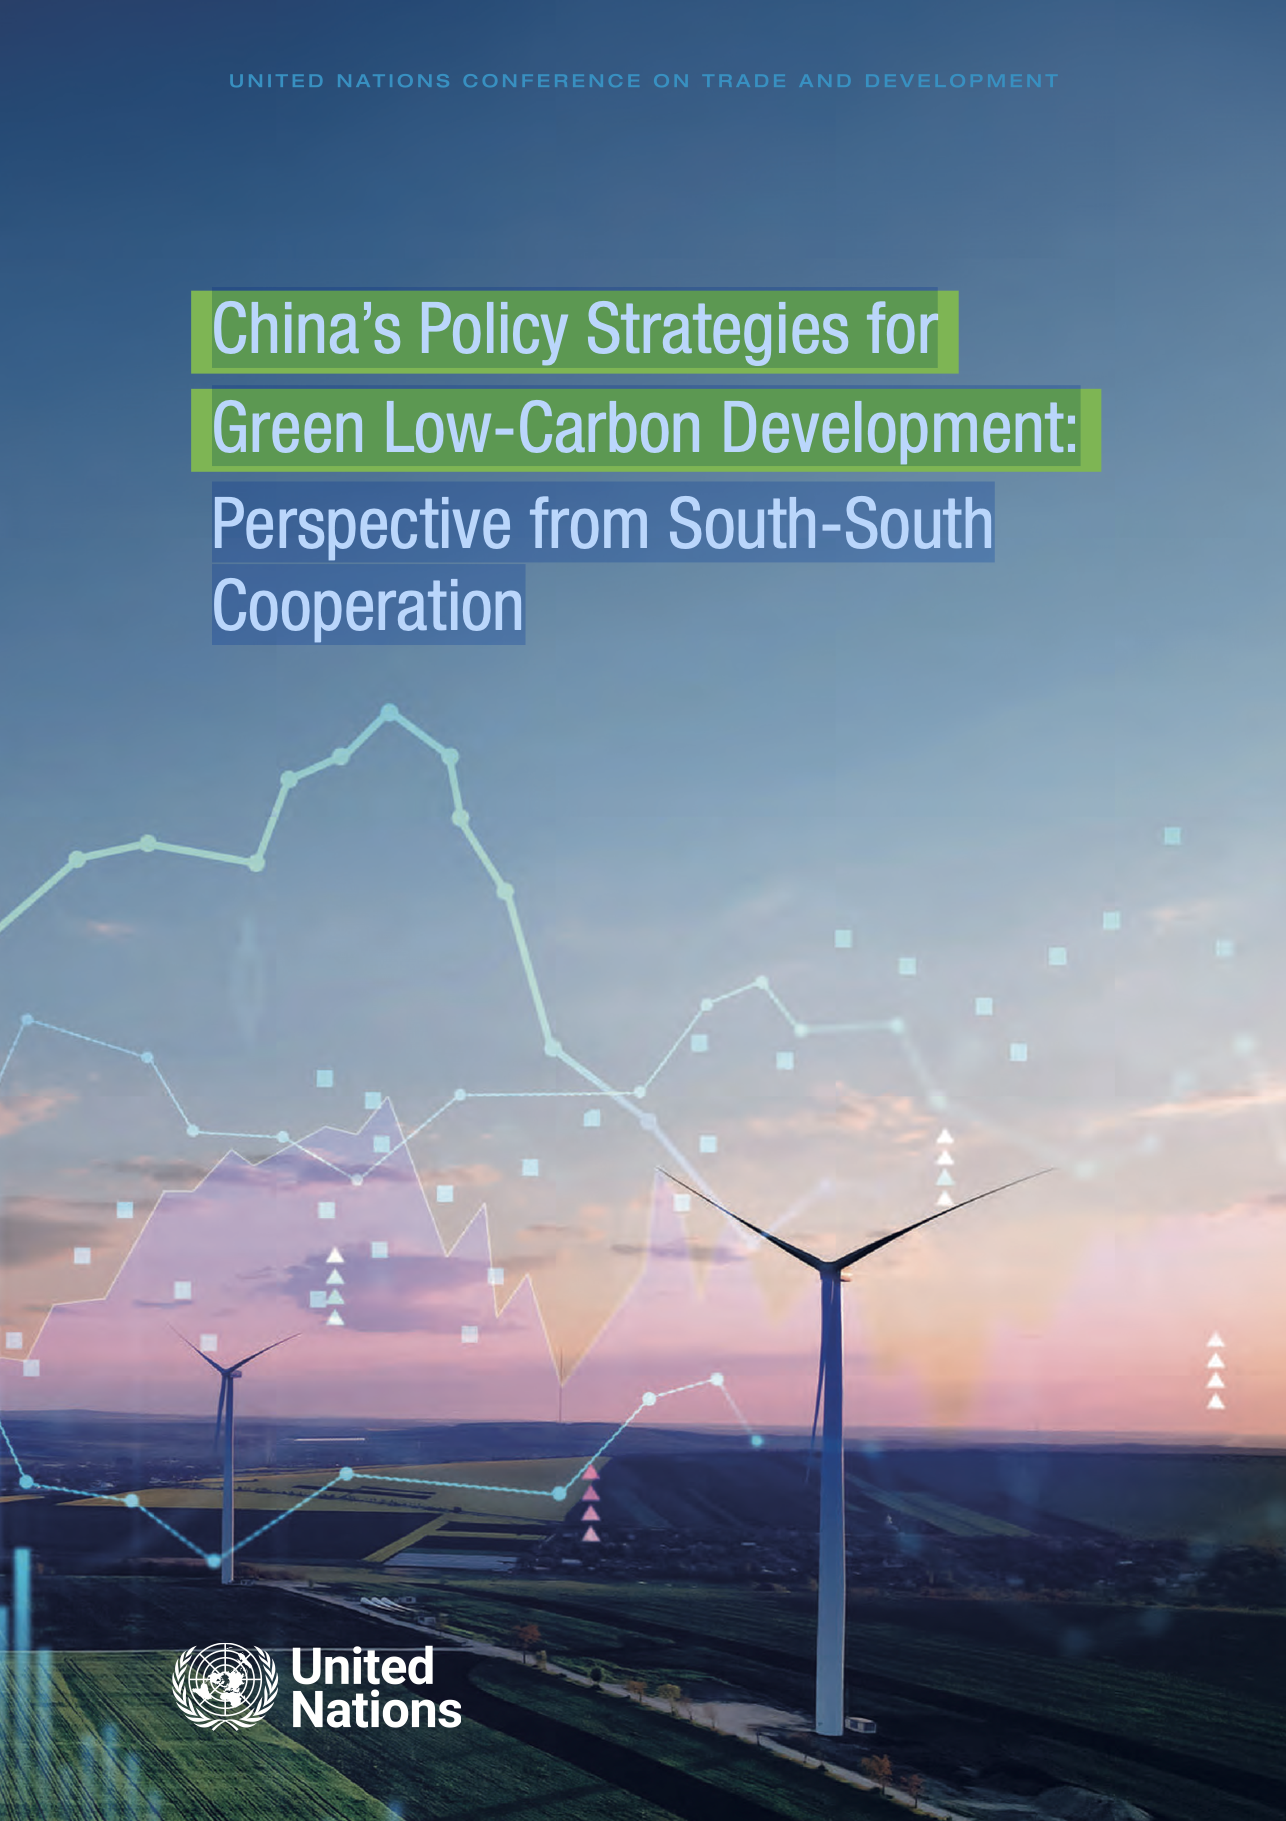 China’s Policy Strategies for Green Low-Carbon Development: Perspective from South-South Cooperation (UNCTAD, 2023)